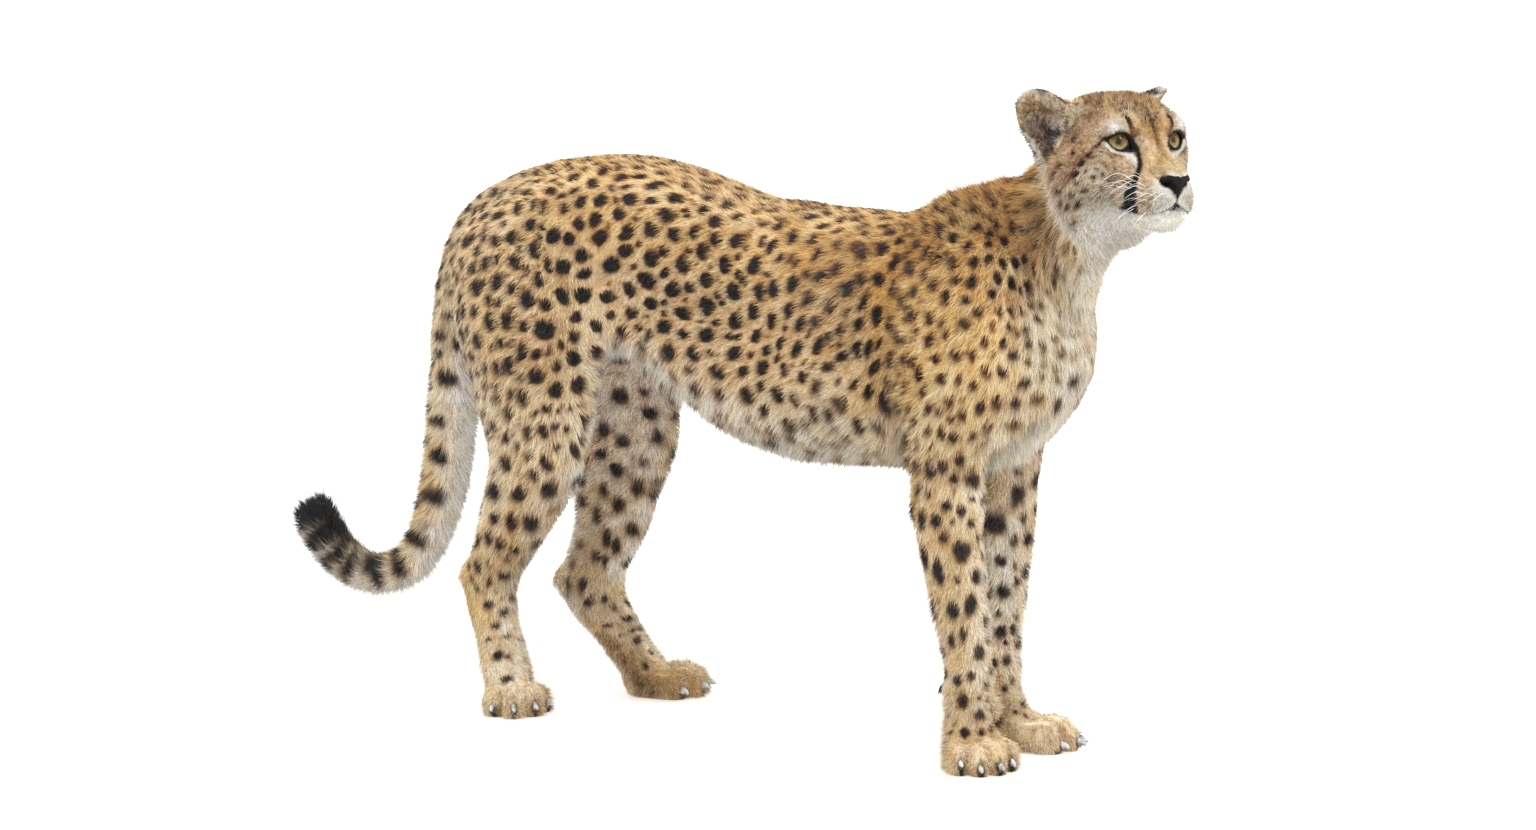 core.move in javascript for cheetah3d